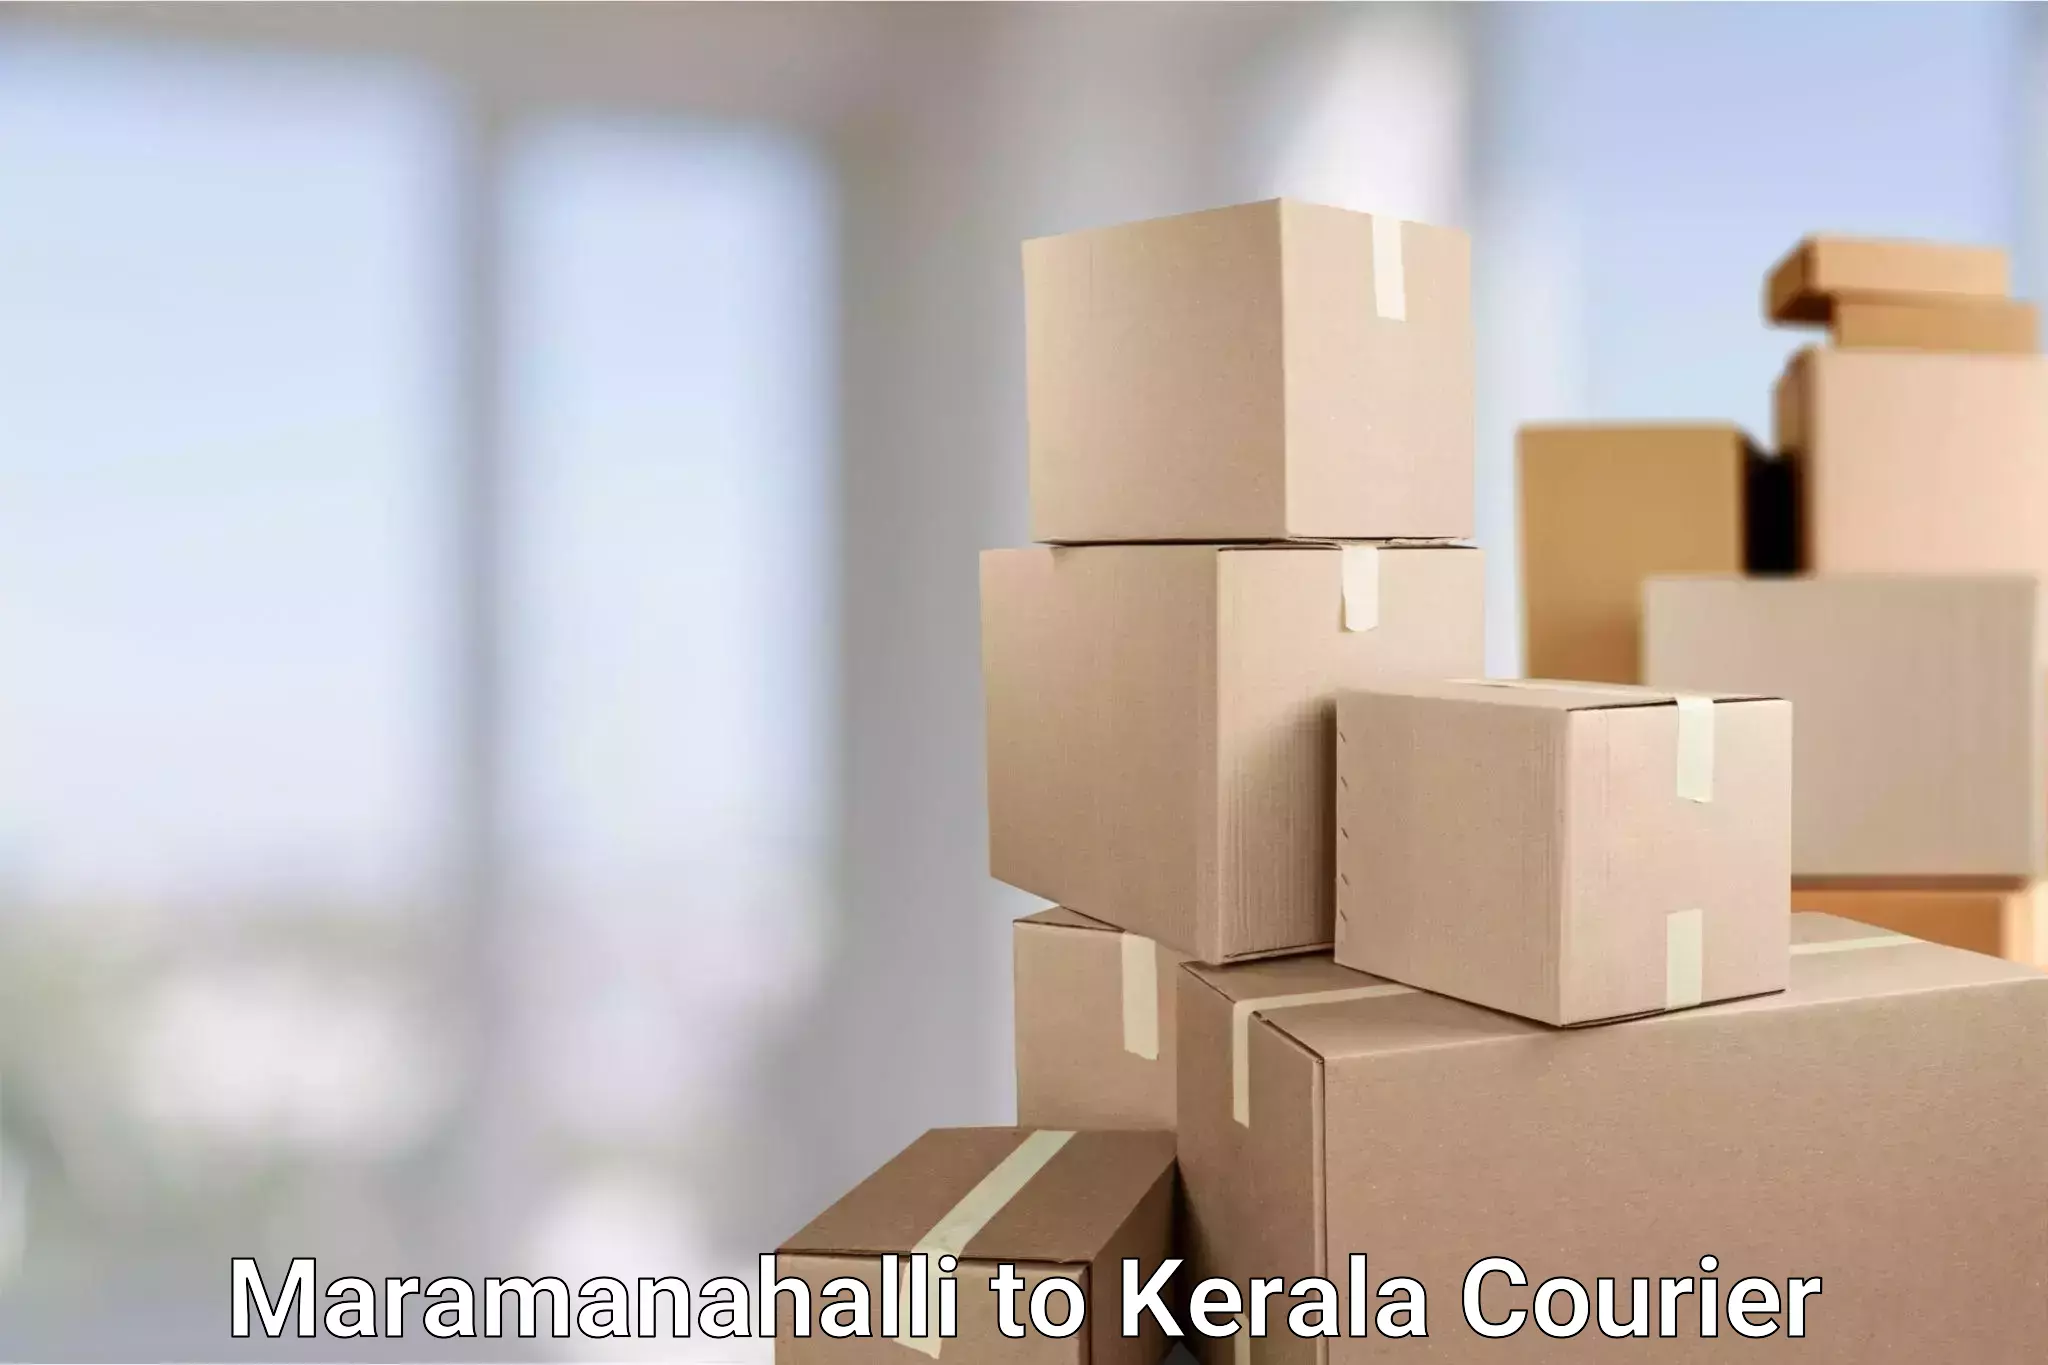 Parcel delivery automation in Maramanahalli to Kazhakkoottam